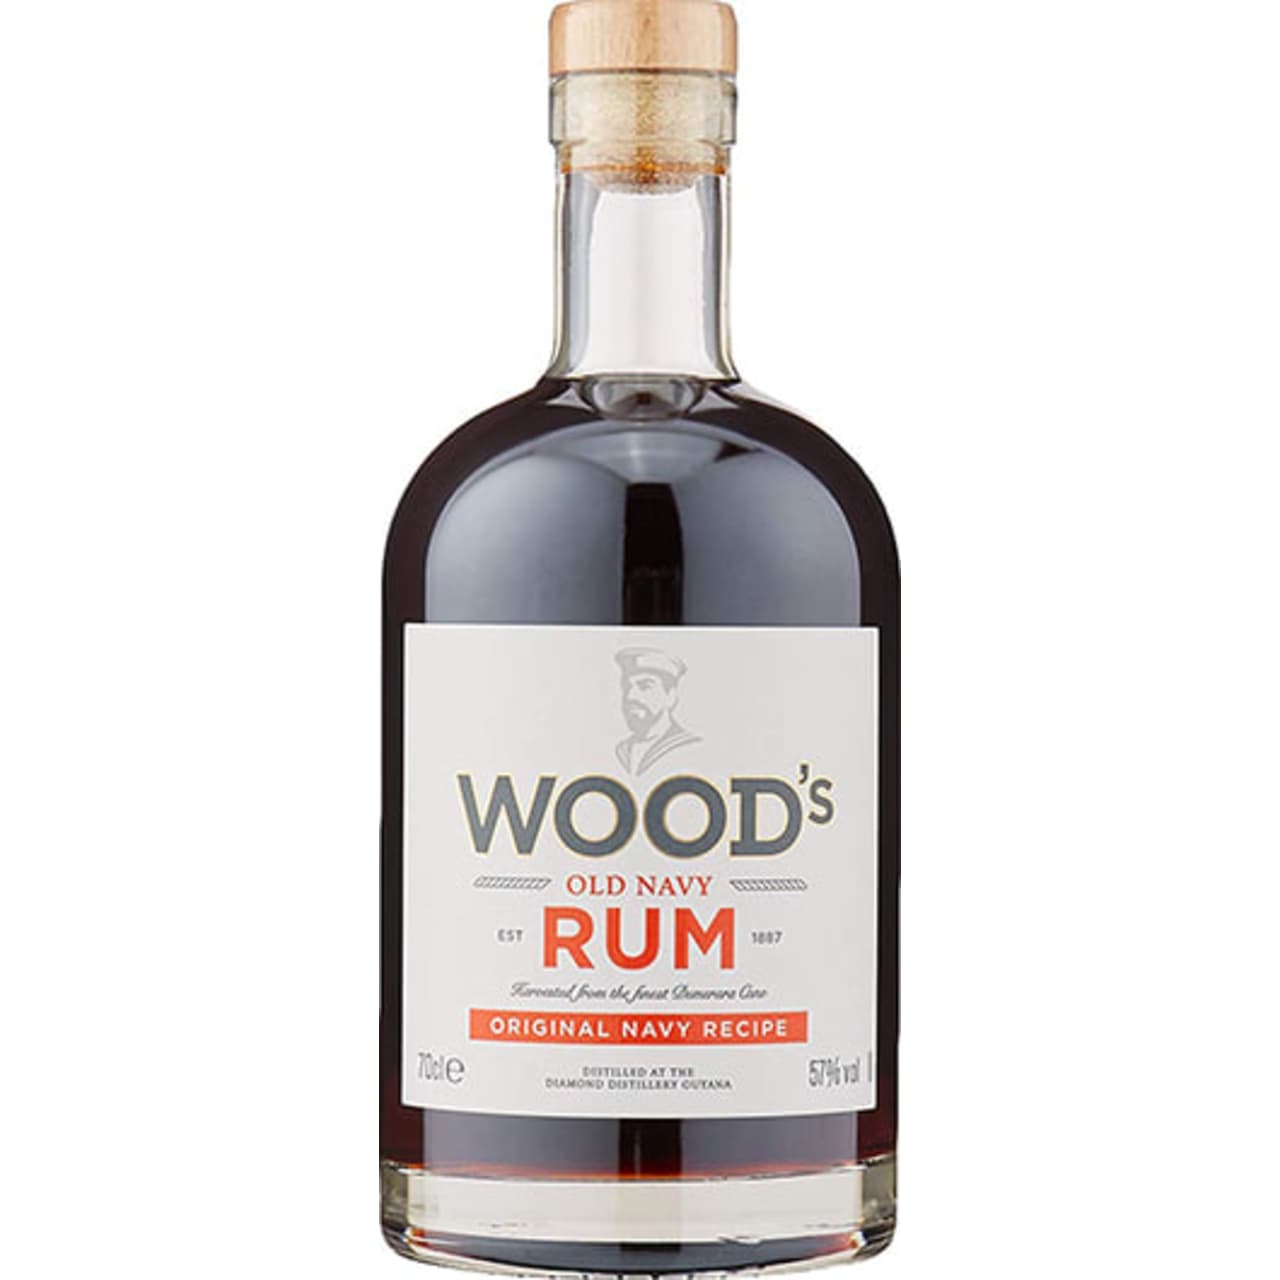 A rich, dark rum with a high abv that retains its smoothness. Notes of brown sugar, Christmas pudding and thick syrupy toffee.